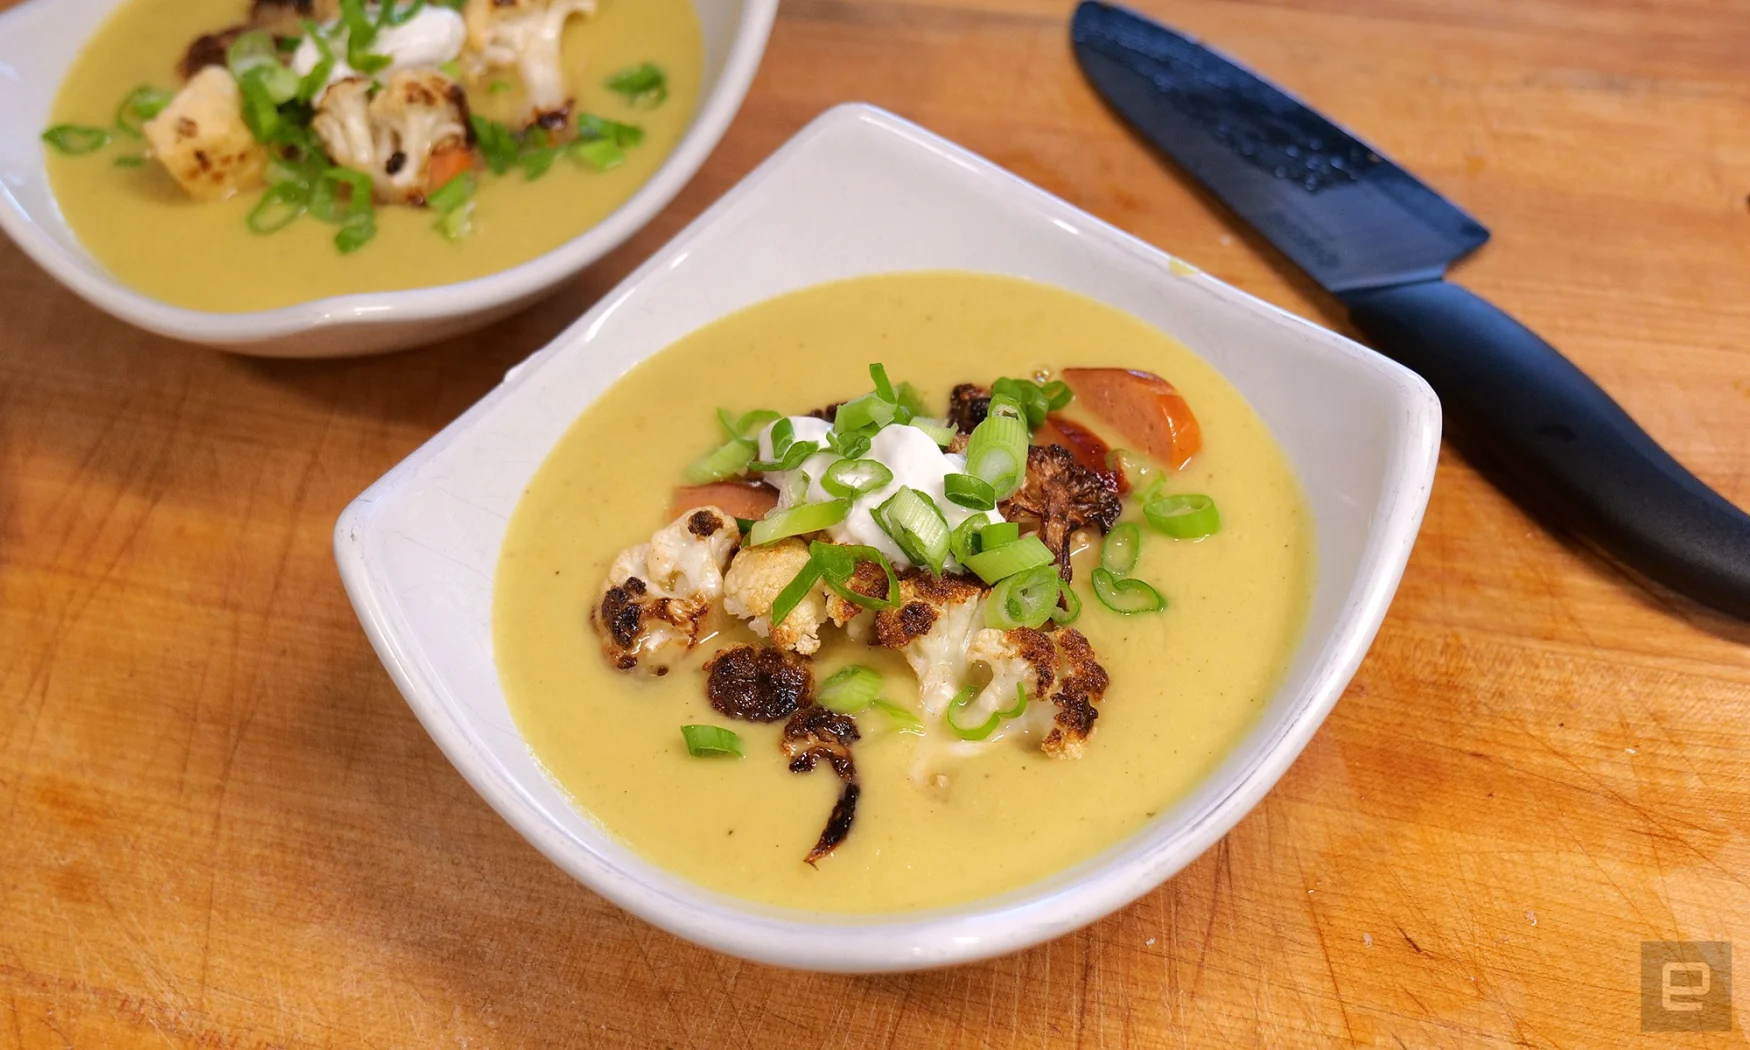 An immersion blender is a very useful kitchen appliance, especially when making creamy soups like this roasted cauliflower chowder. 